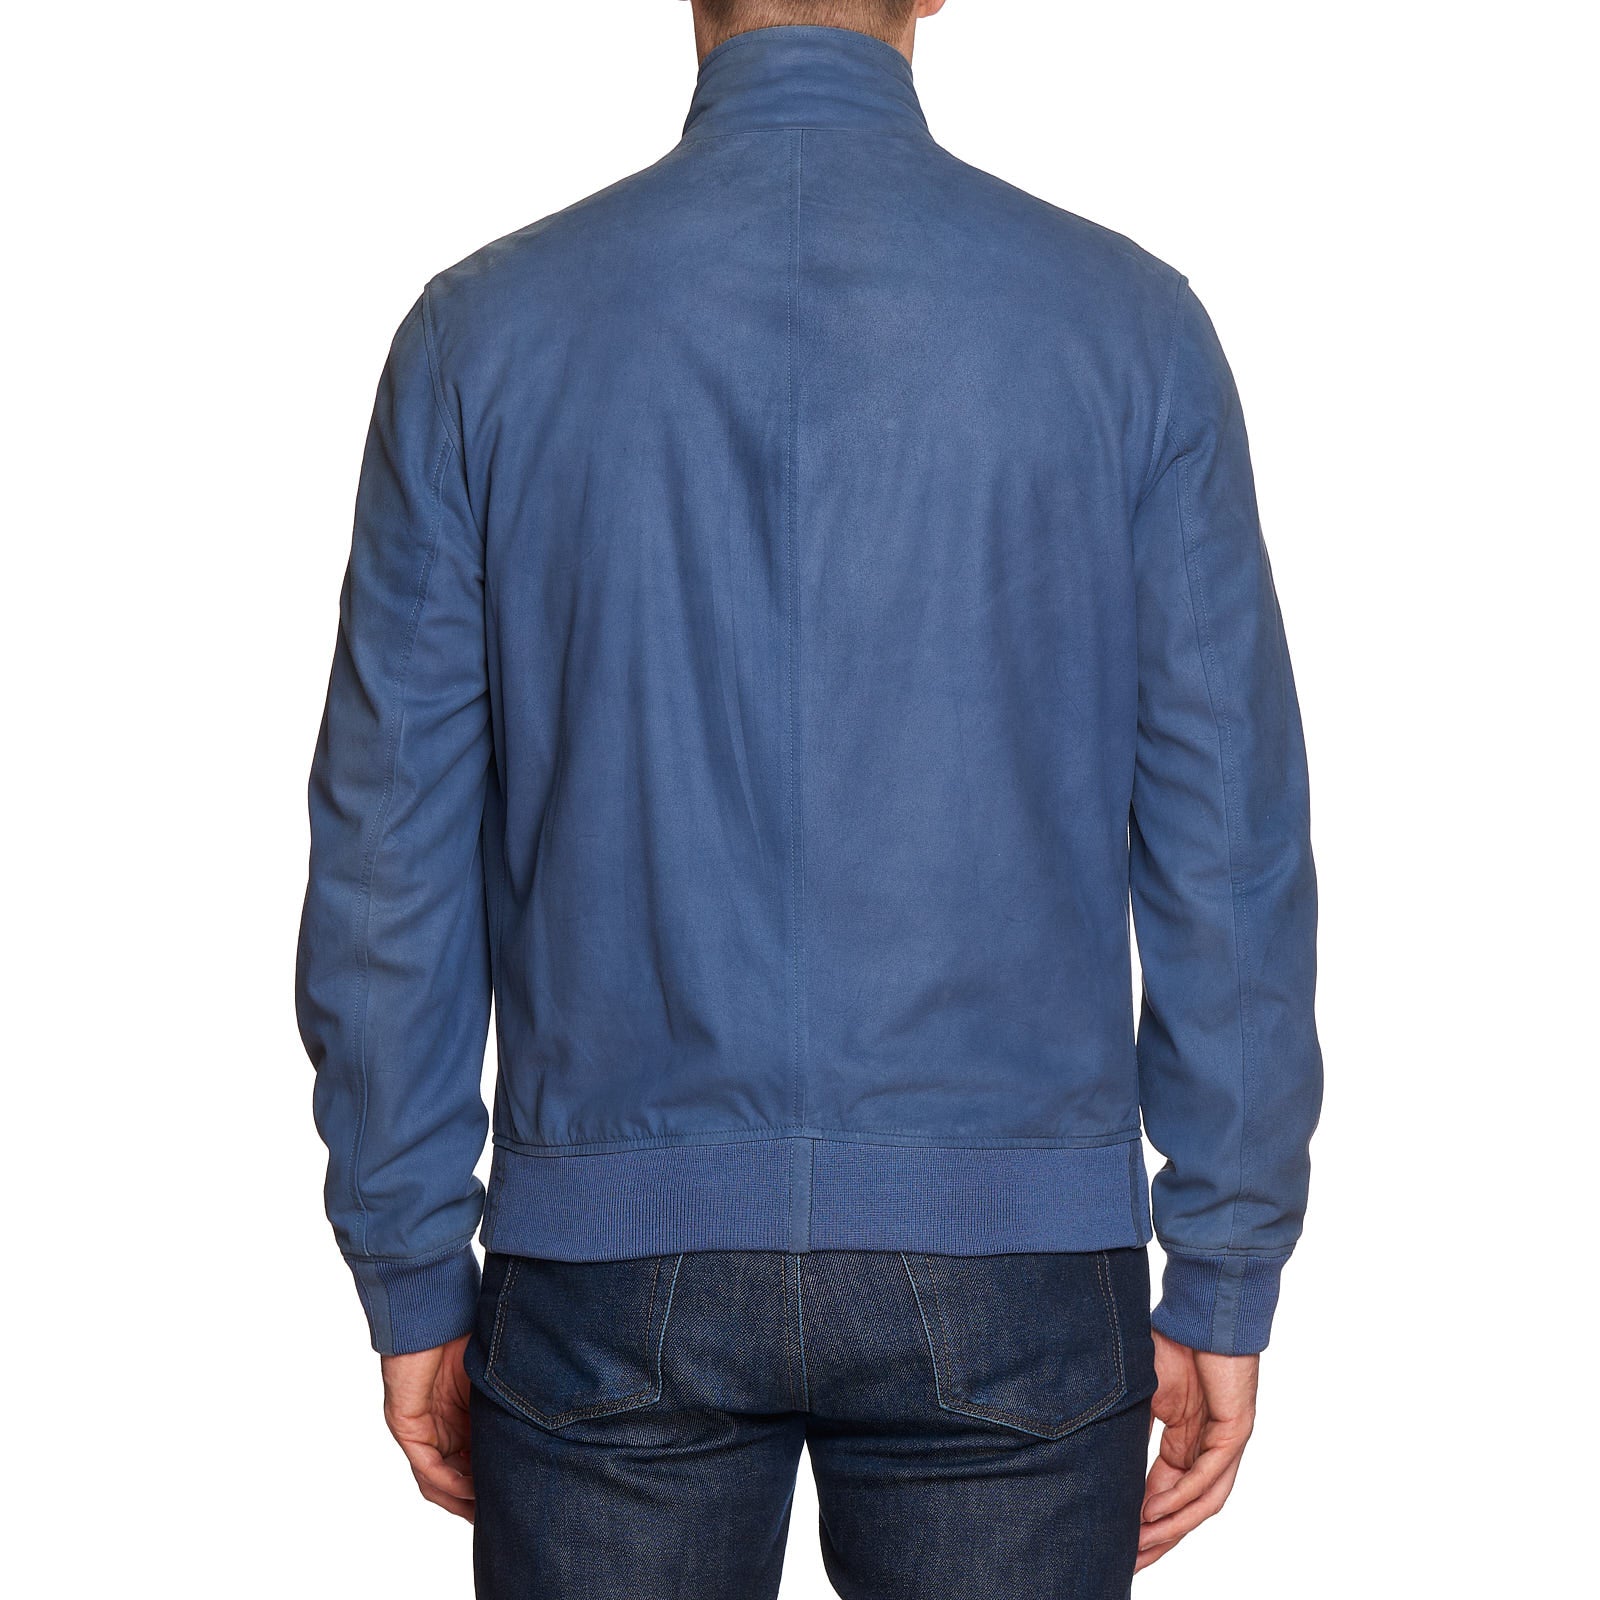 SERAPHIN Blue Goat Suede Leather Silk Lined Bomber Jacket FR 50 US M SERAPHIN